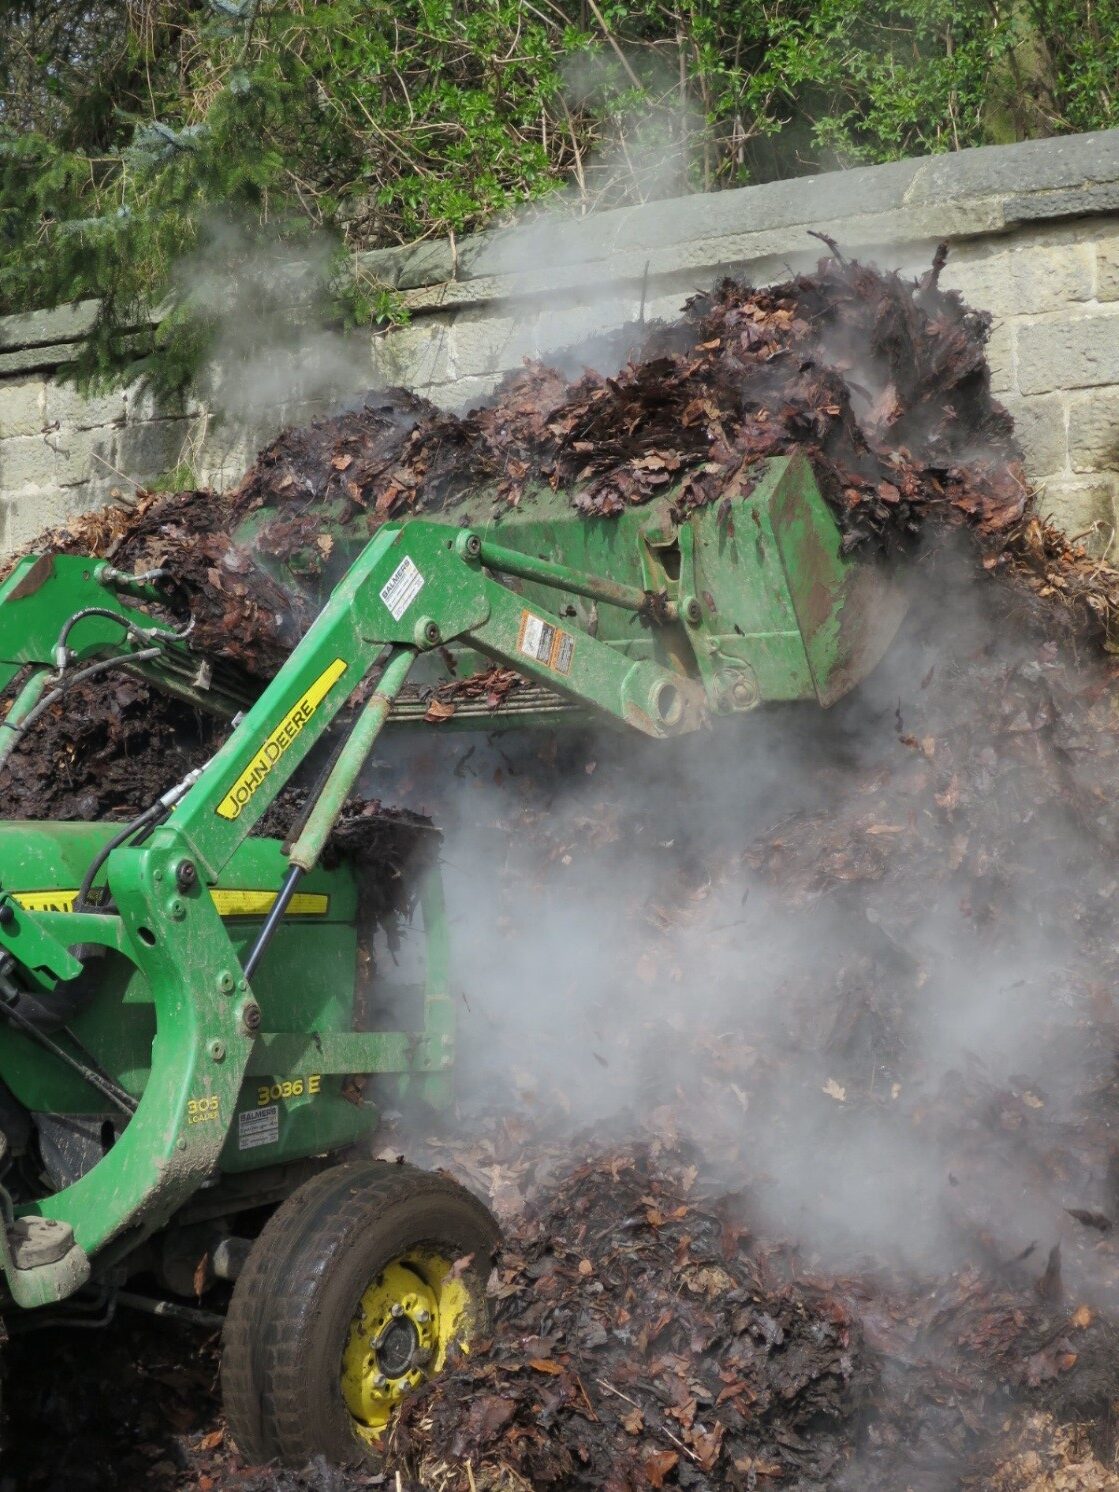 A digger carrying compost and mulch